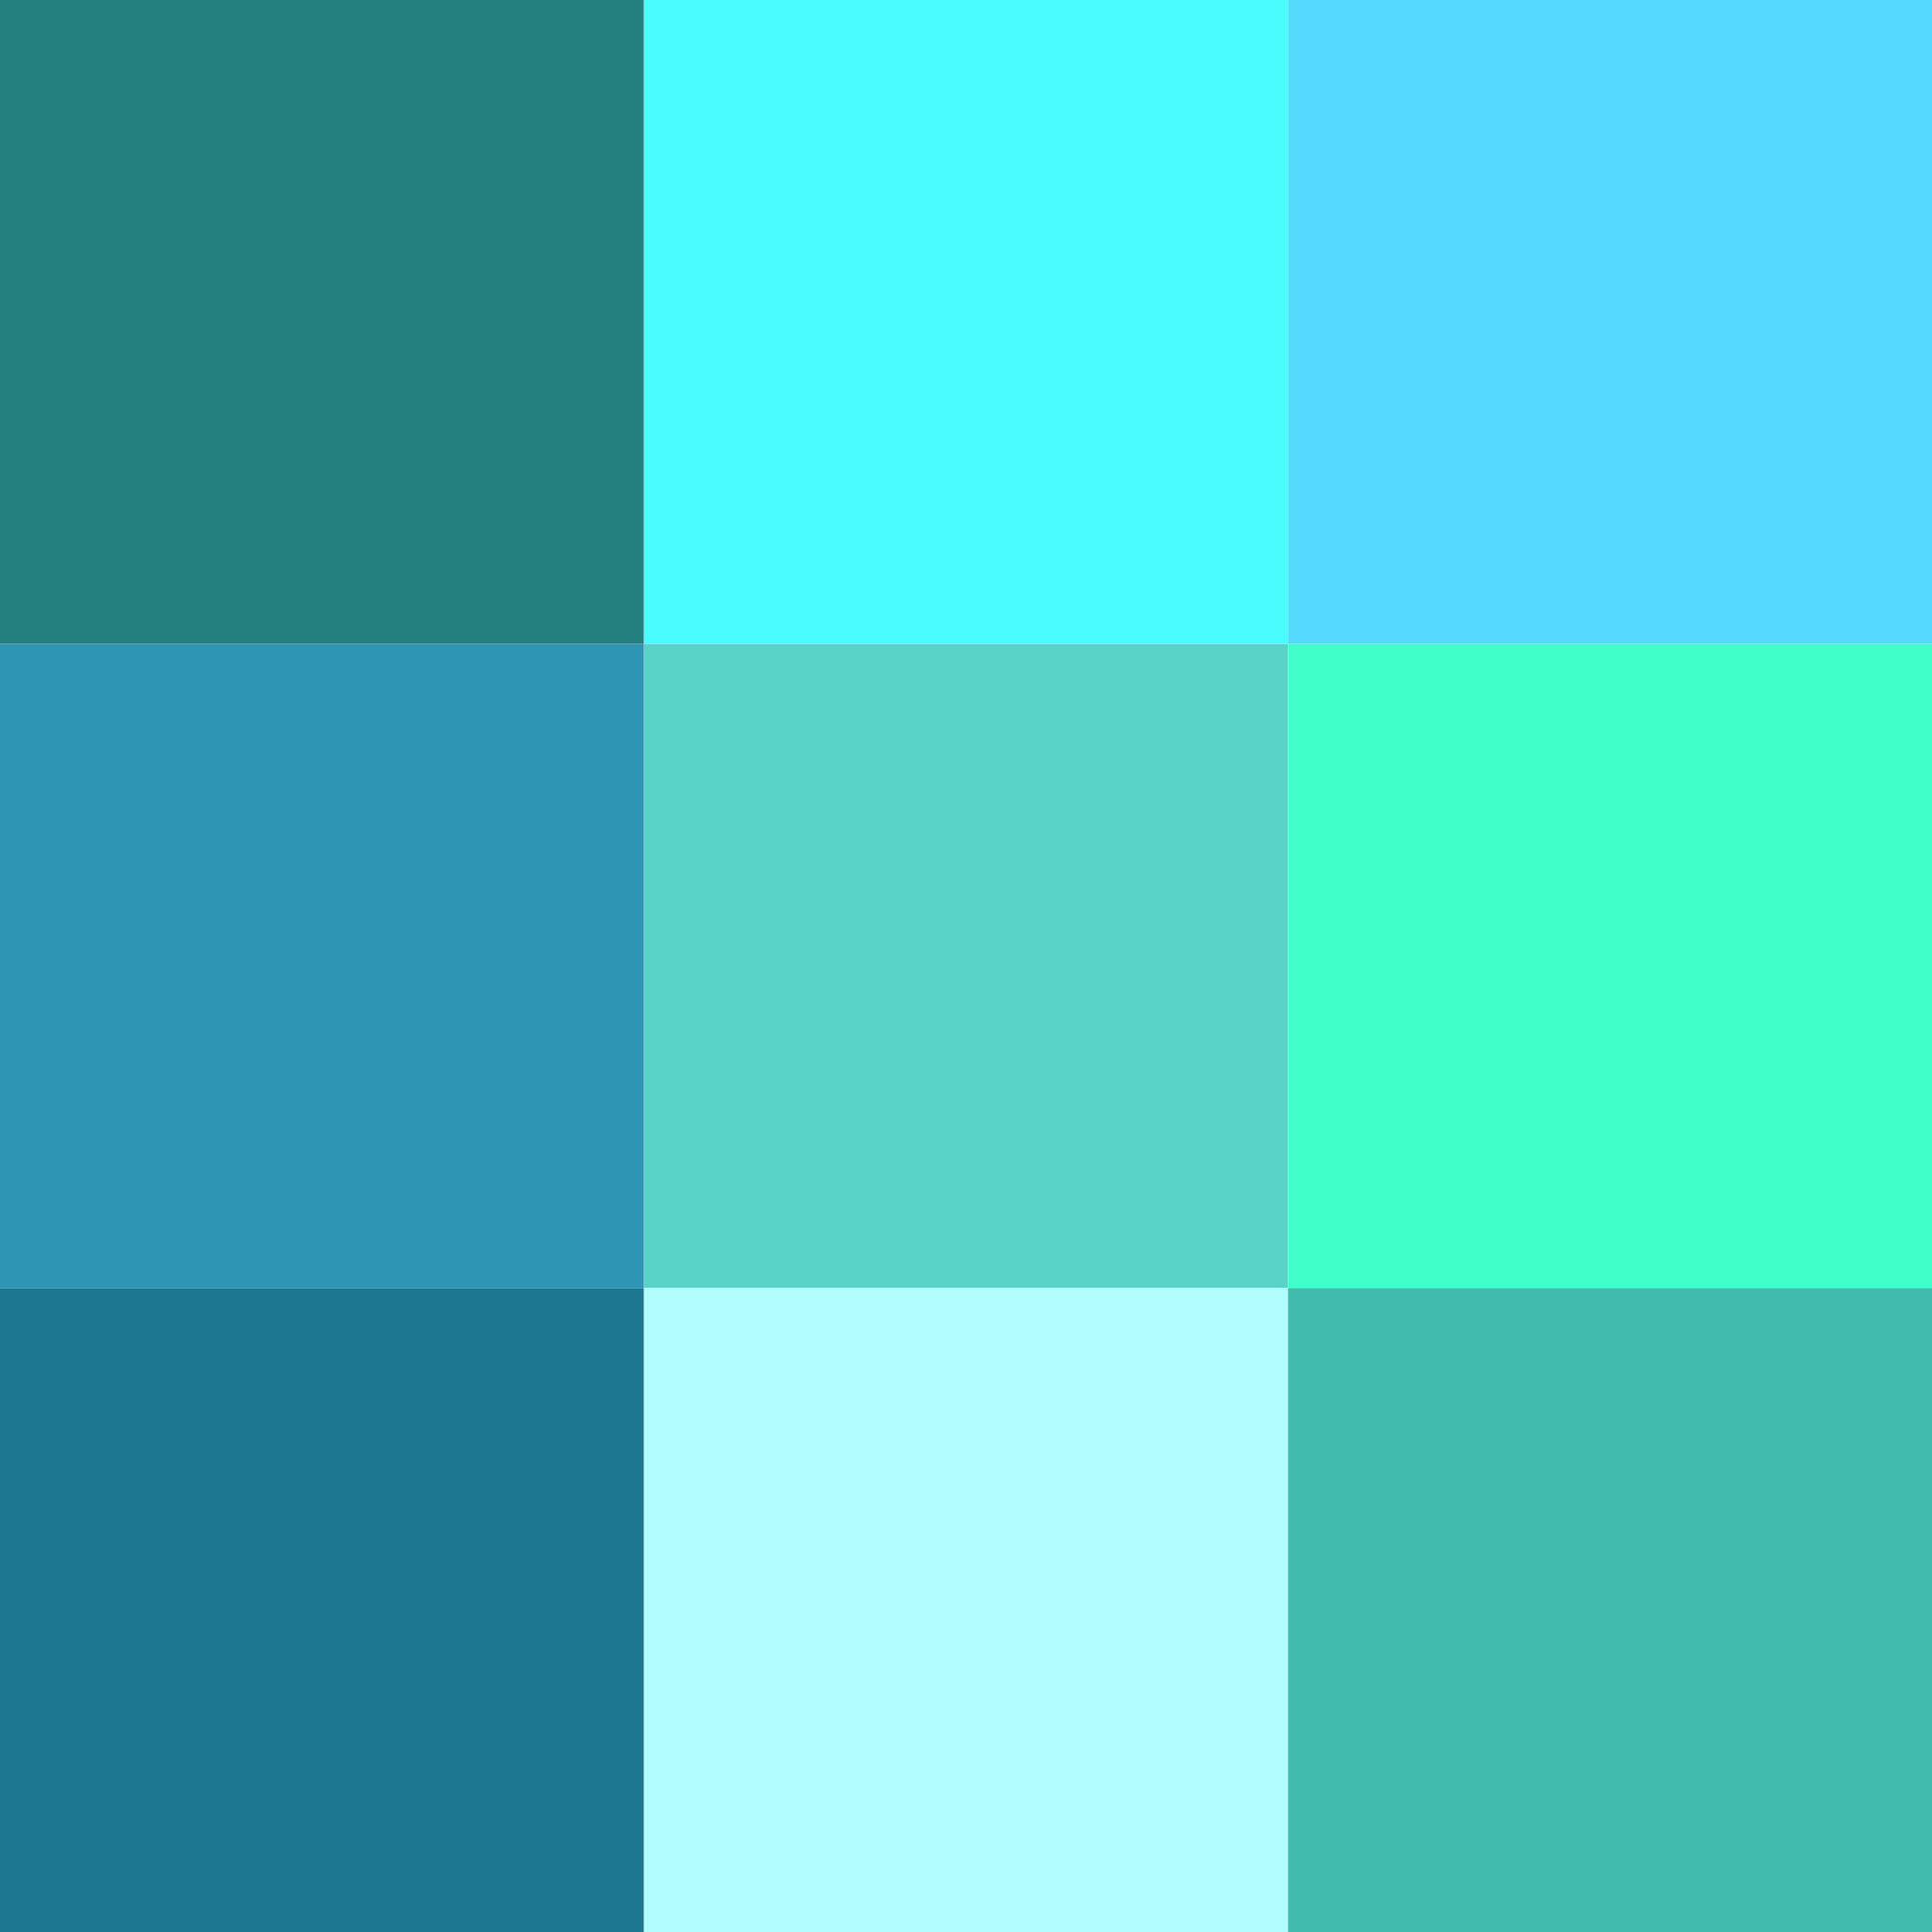 2000x2000 Interesting What Color Is Teal Green 72 In Wallpaper Hd Design with What  Color Is Teal